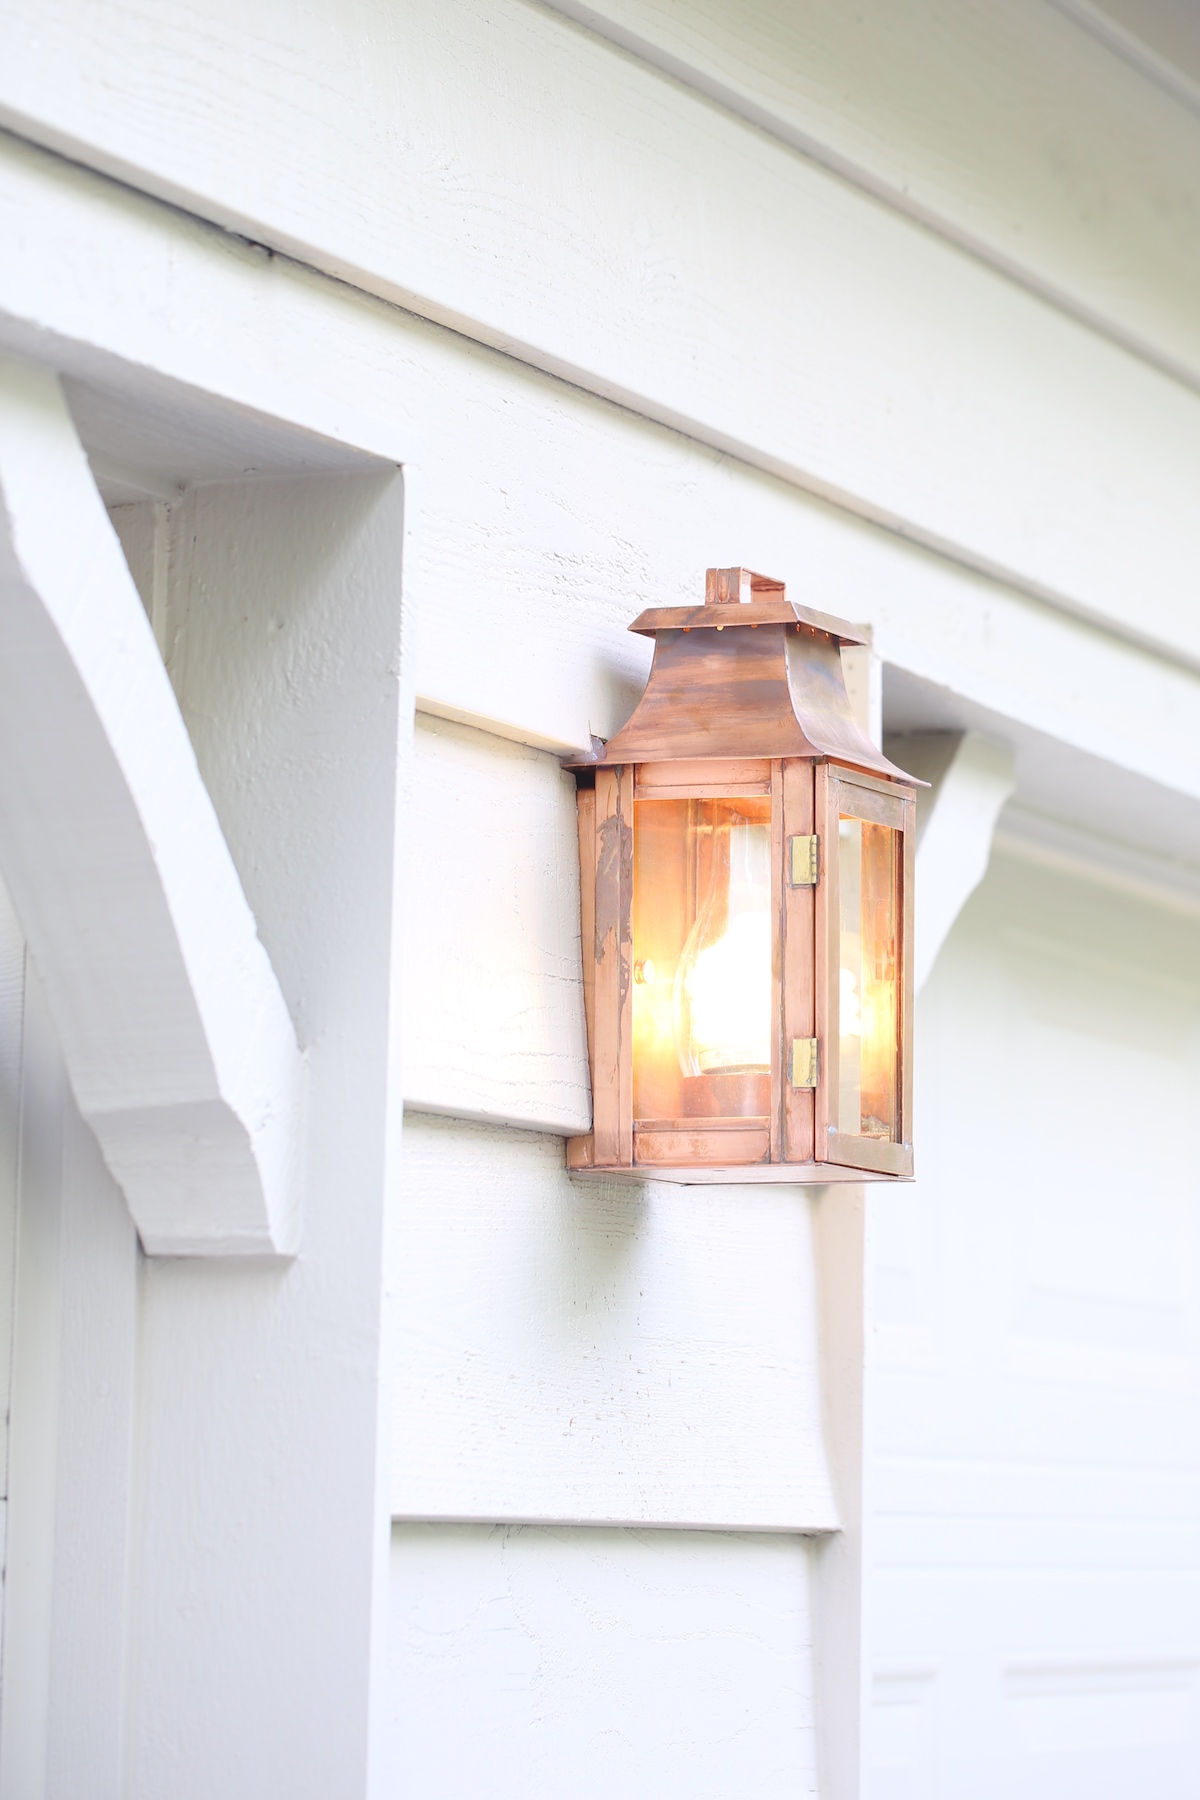 A copper lantern on the white painted exterior of a home.